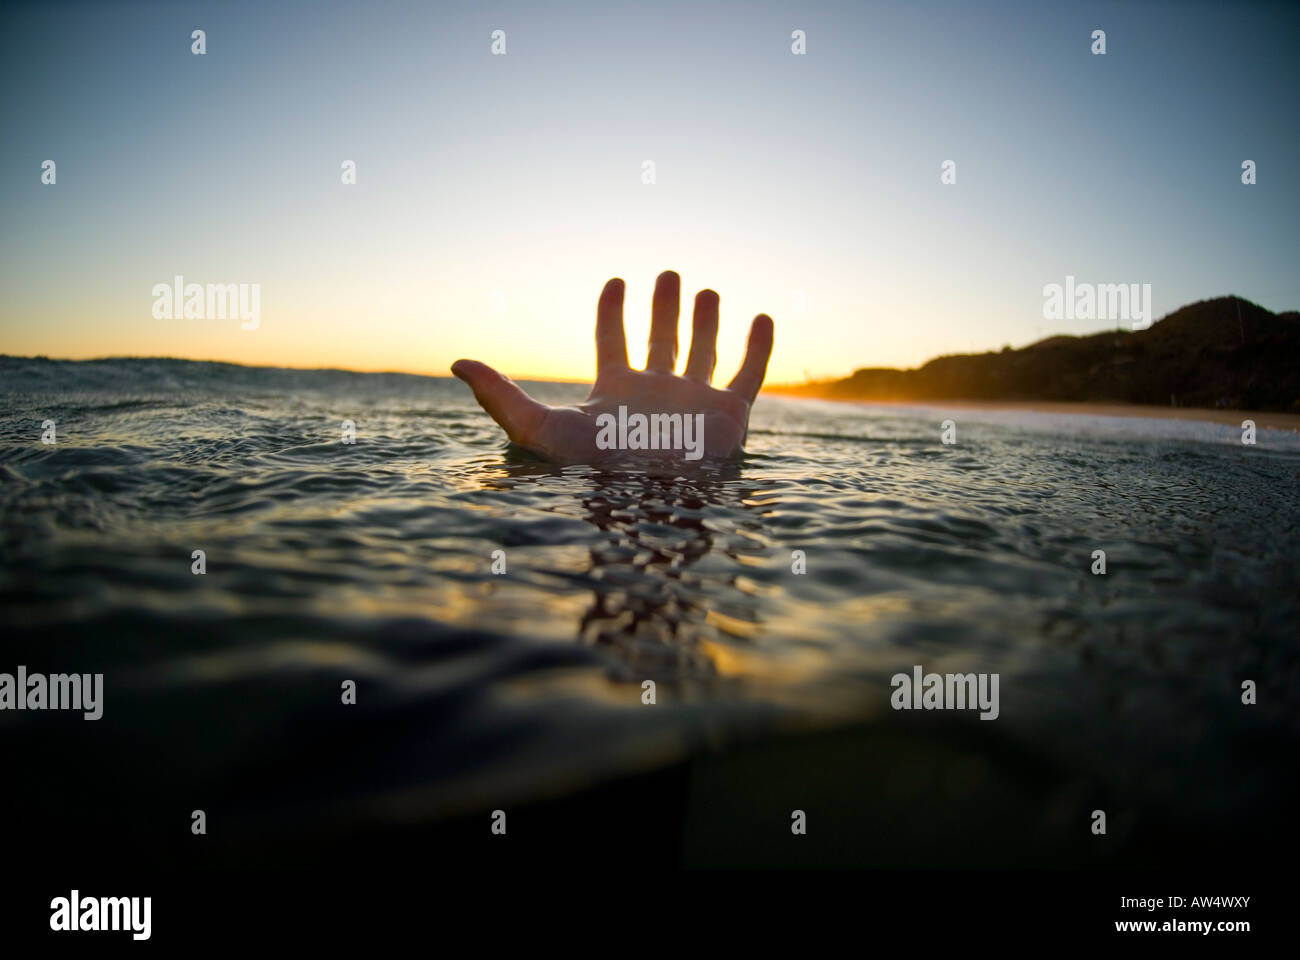 A male s hand in the water Stock Photo